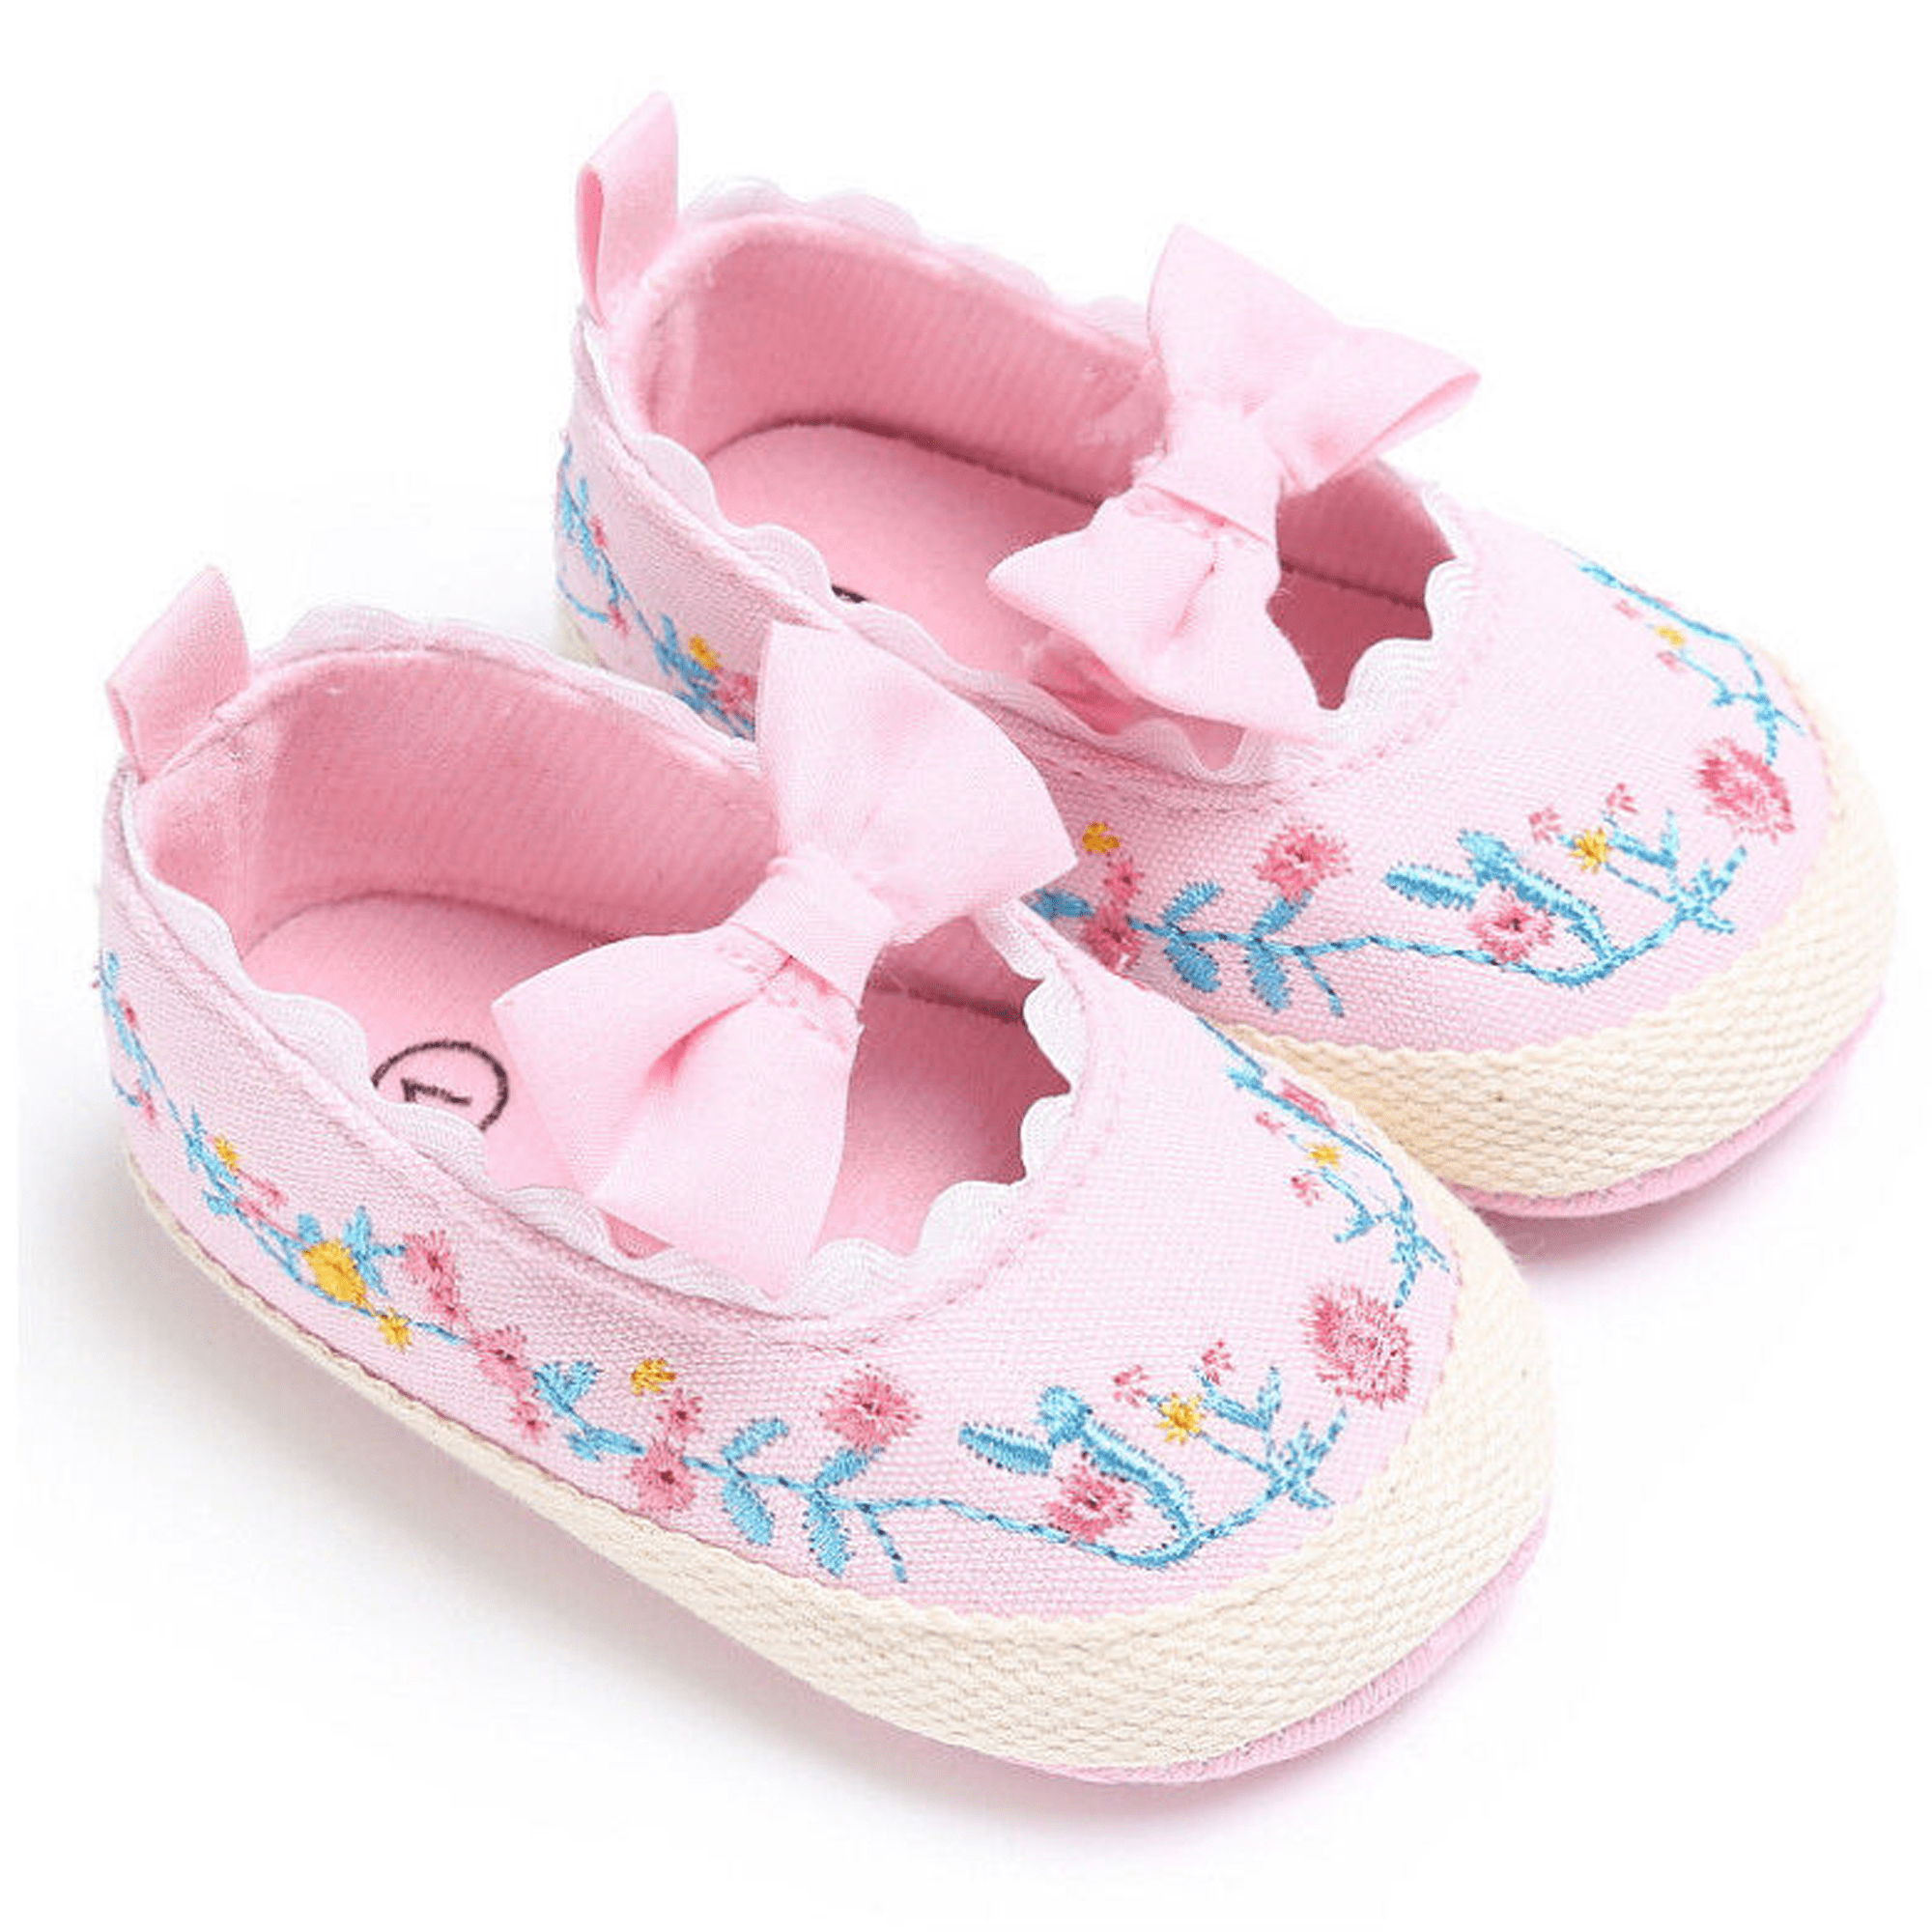 Baby Girls No-slip Bowknot Toddler Infant Newborn Soft Sole Shoes 3-11 Month New 